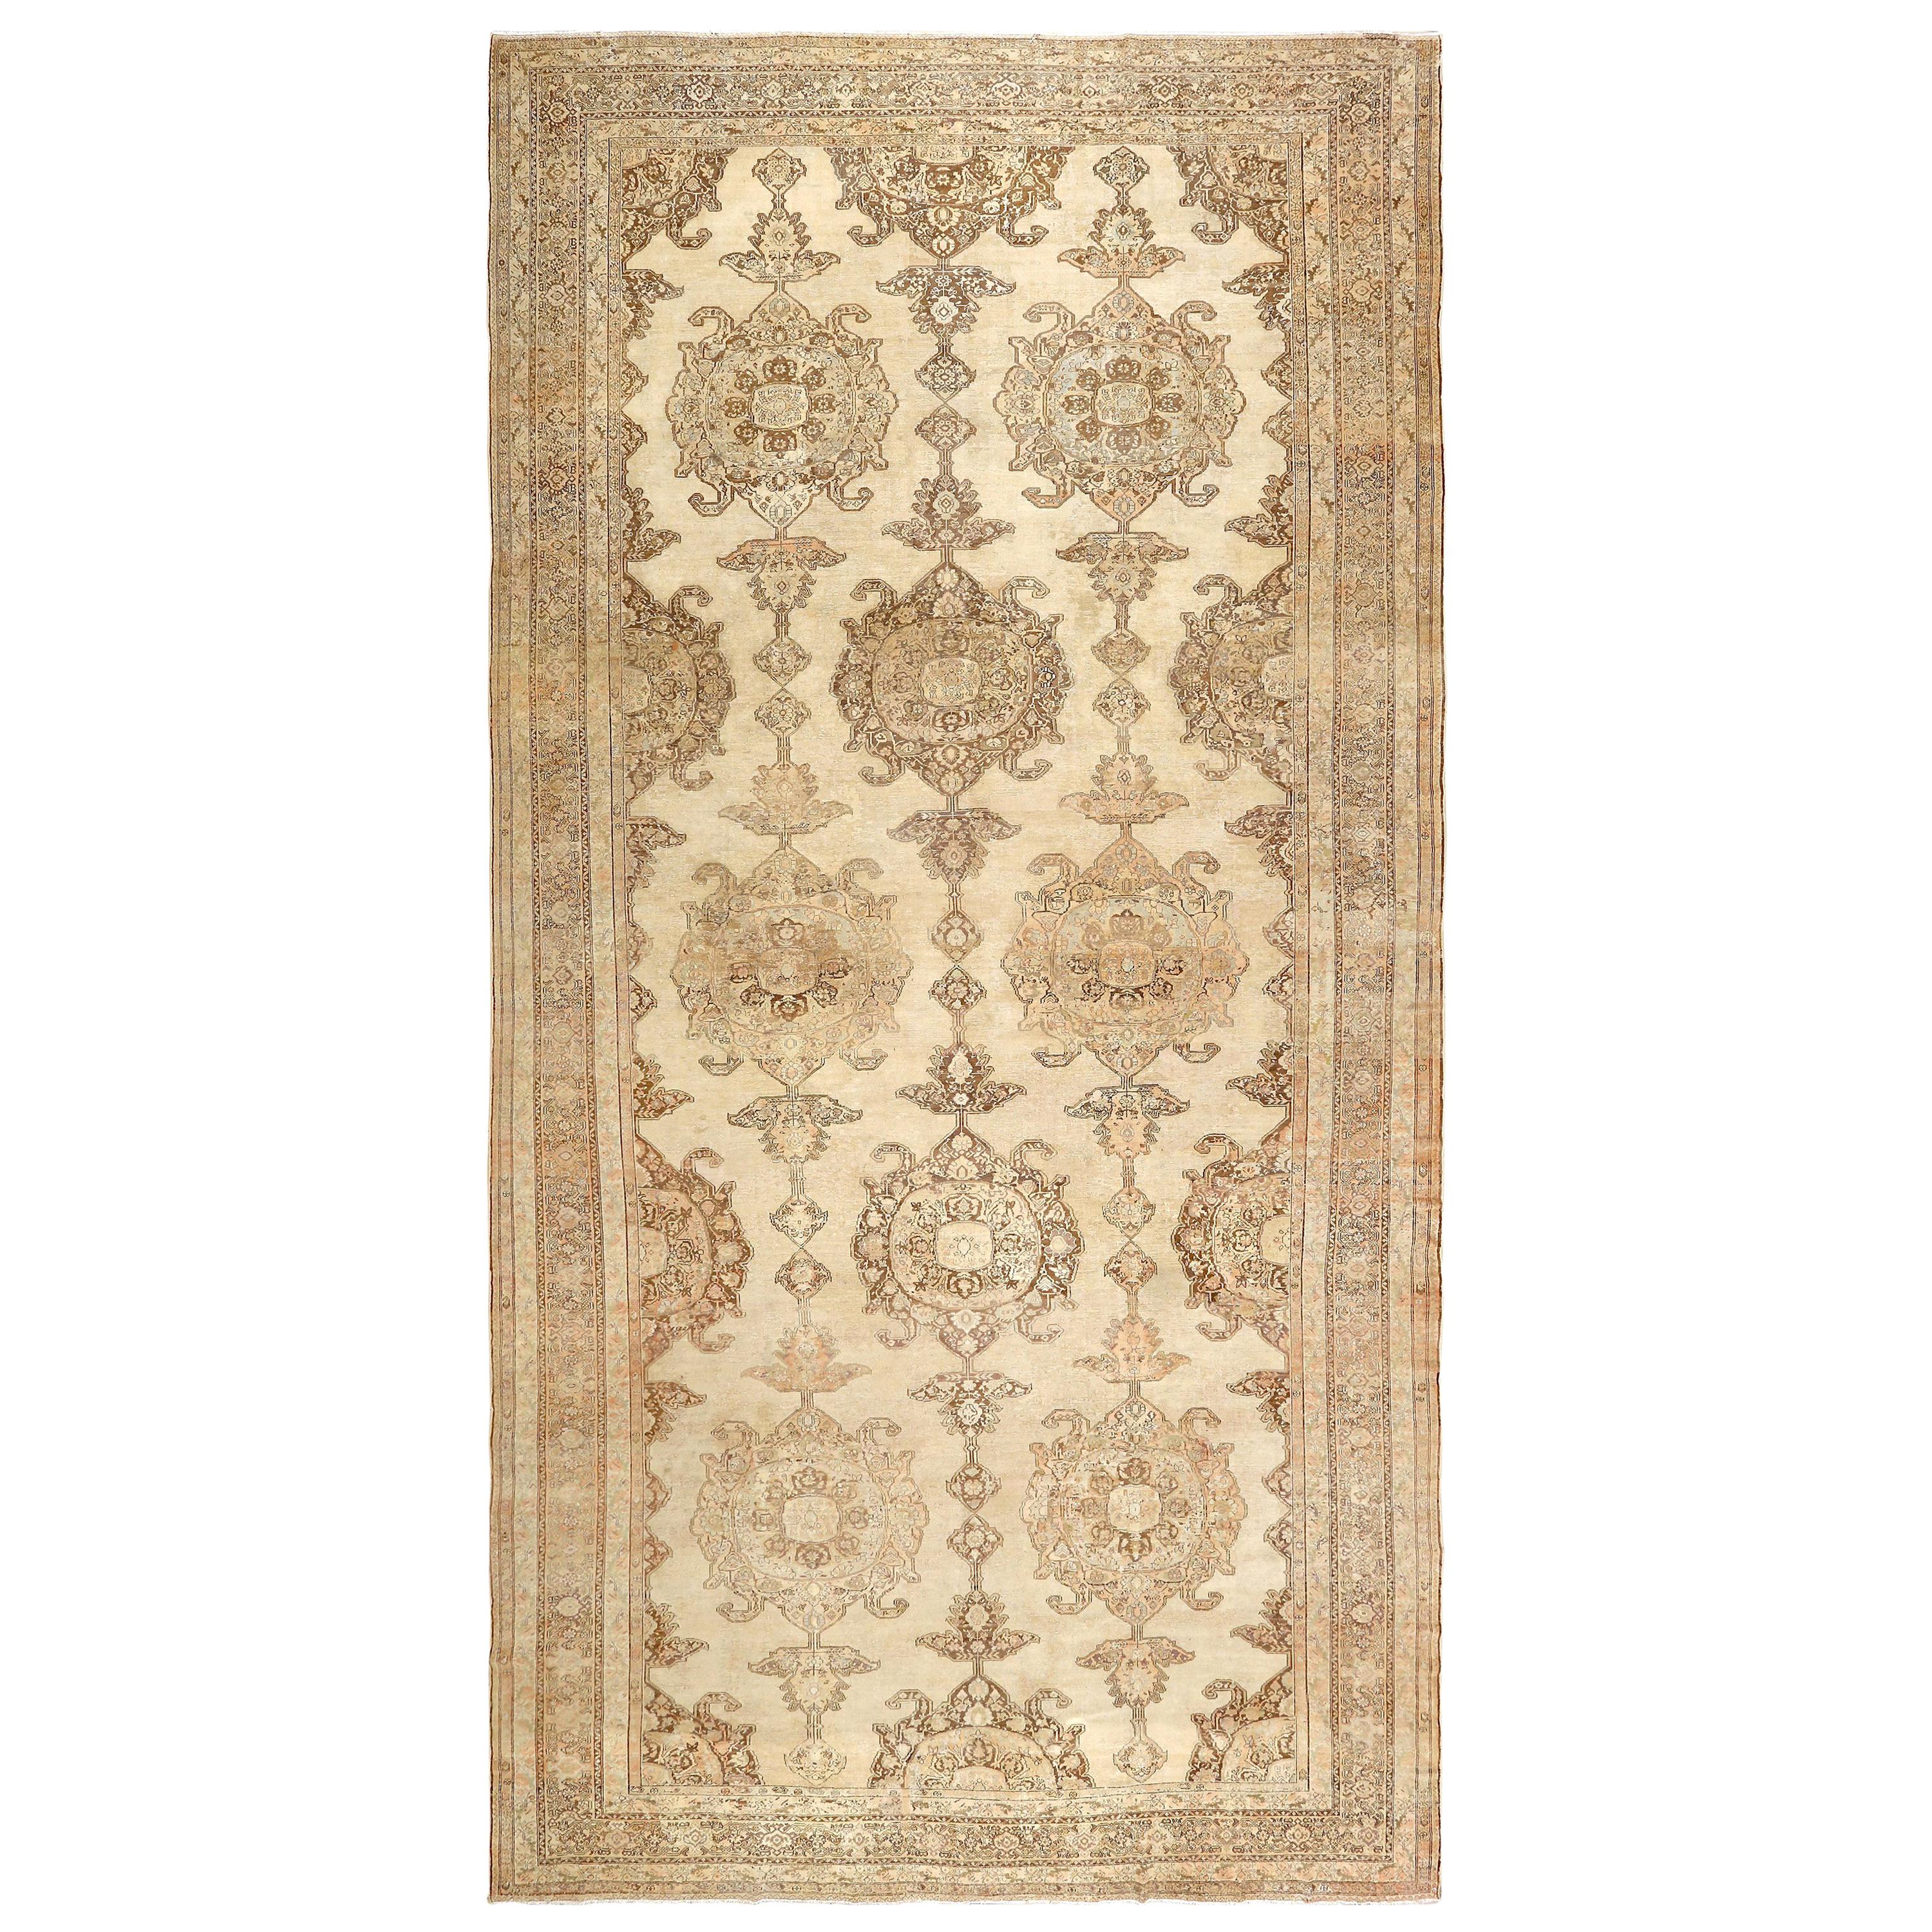 Nazmiyal Collection Antique Malayer Persian Rug. Size: 13 ft 3 in x 26 ft 7 in 